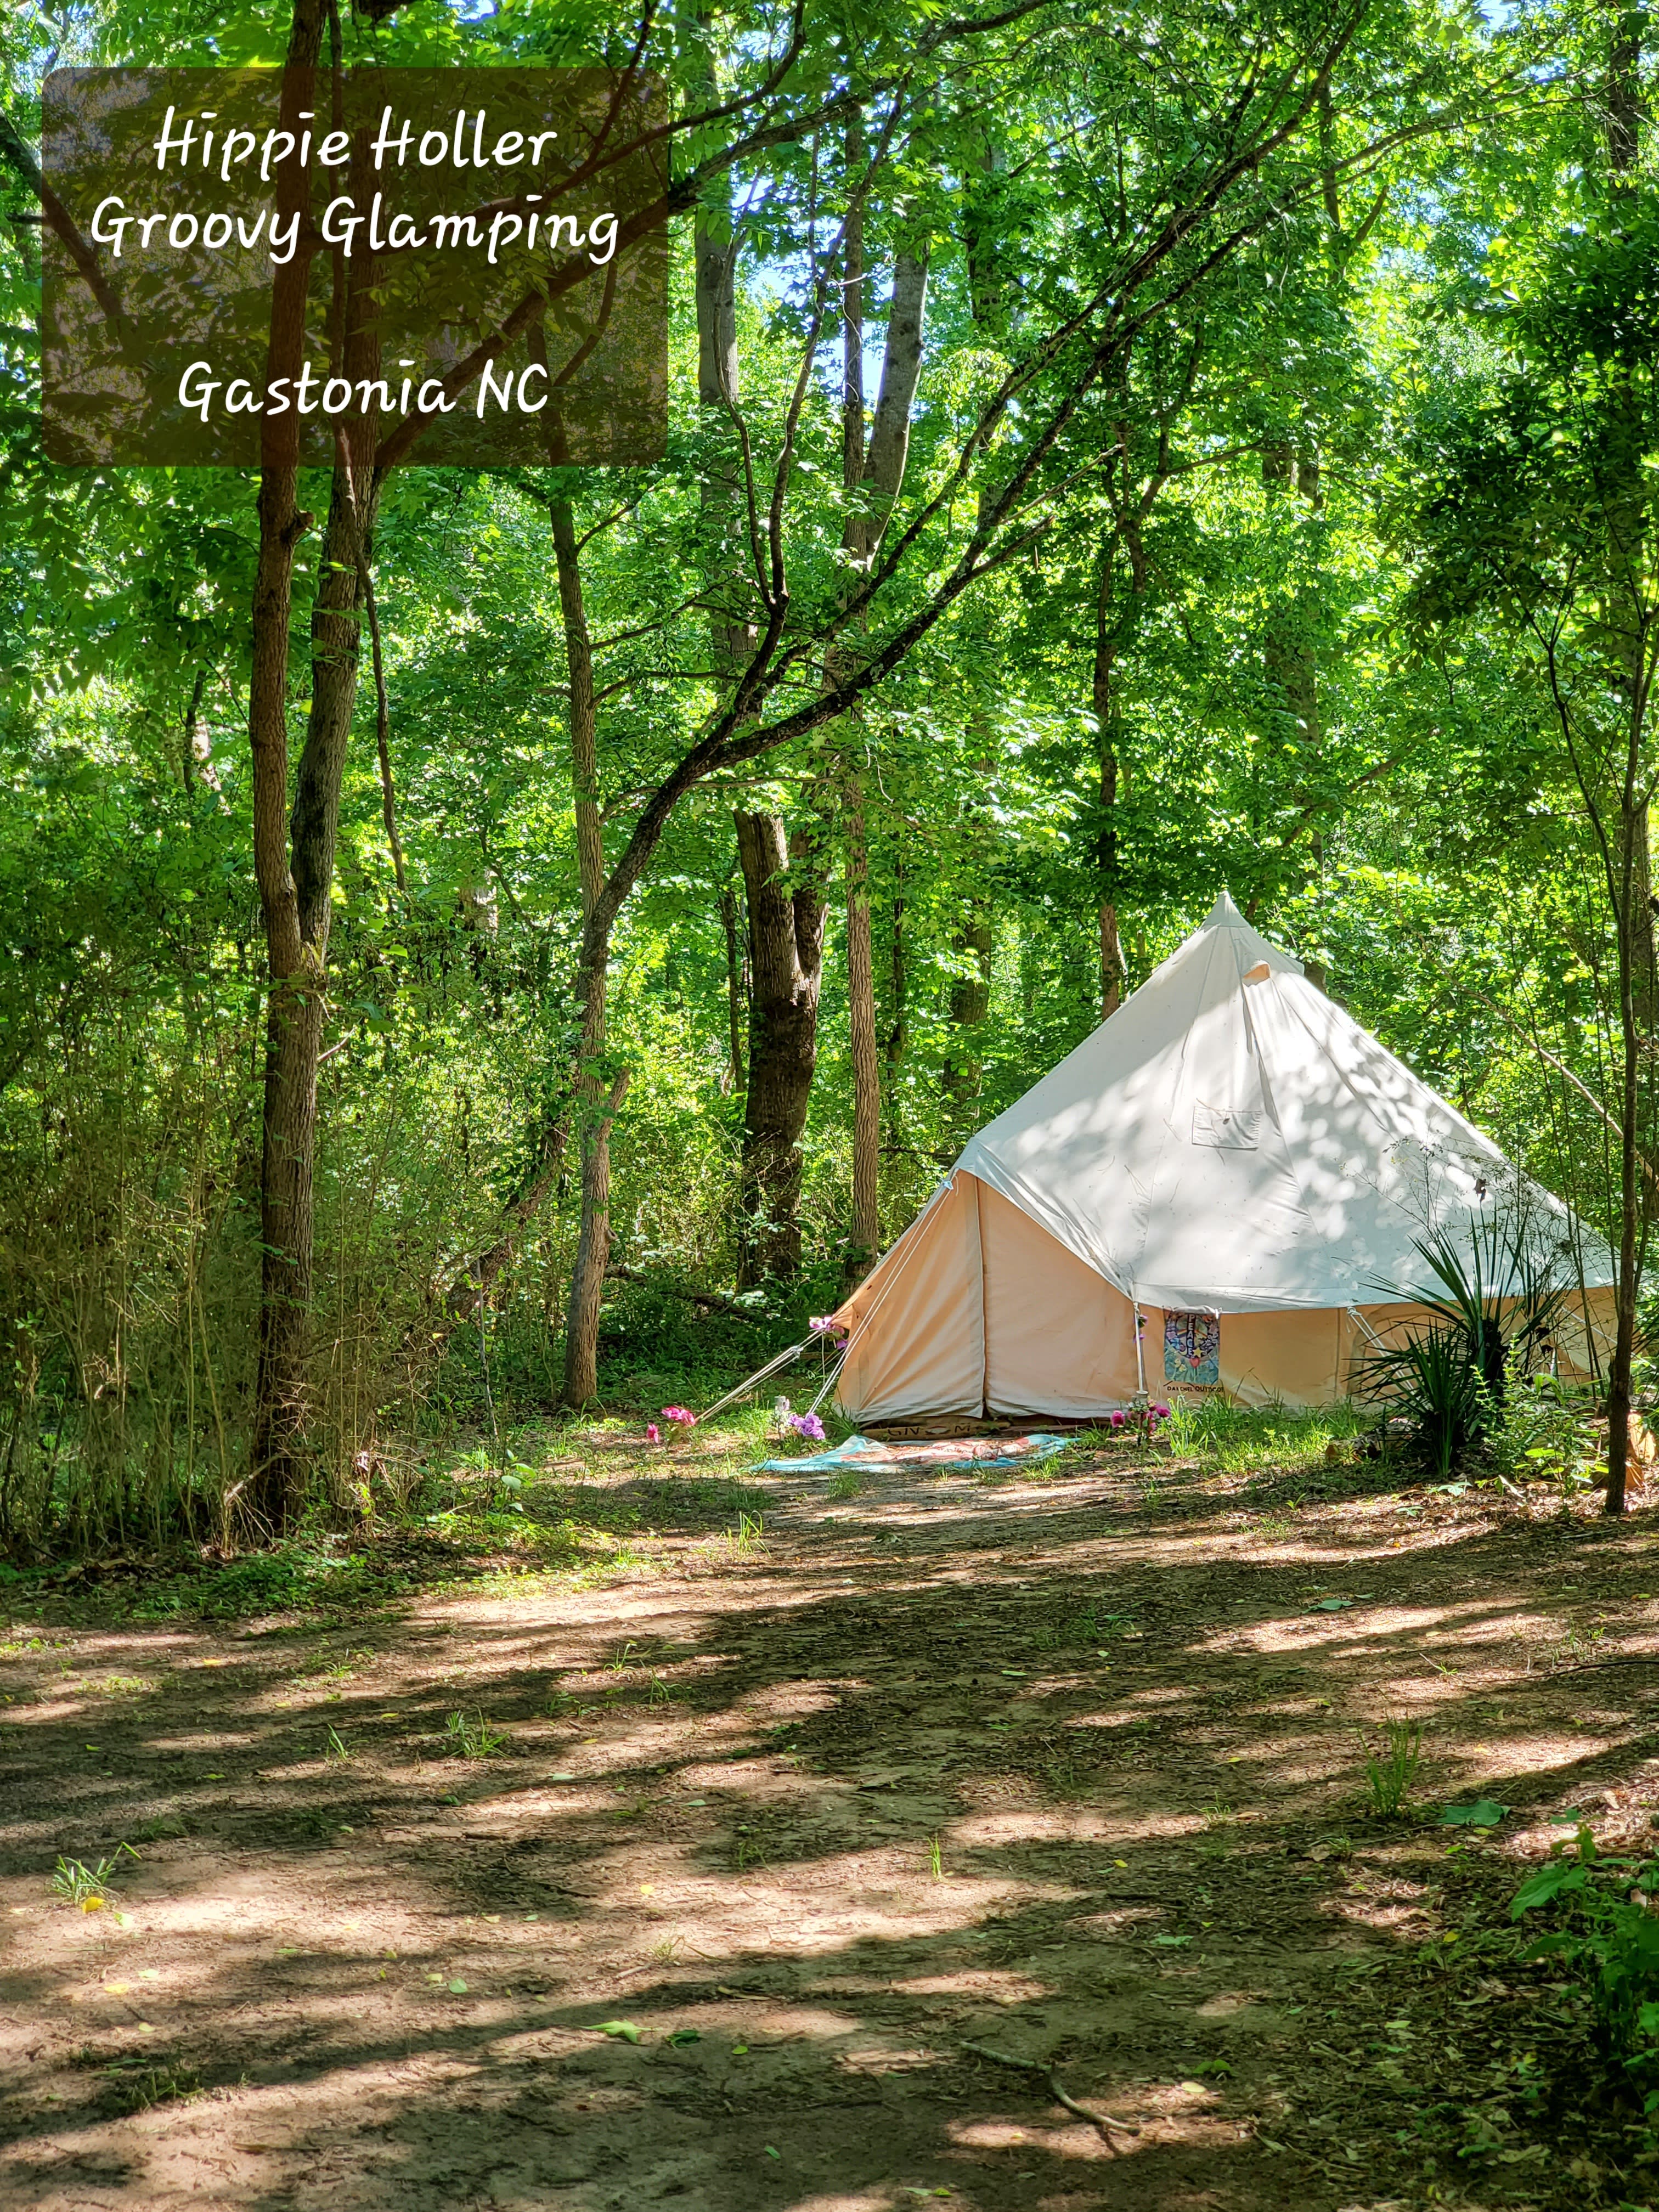 Hippie Holler Groovy Glamping